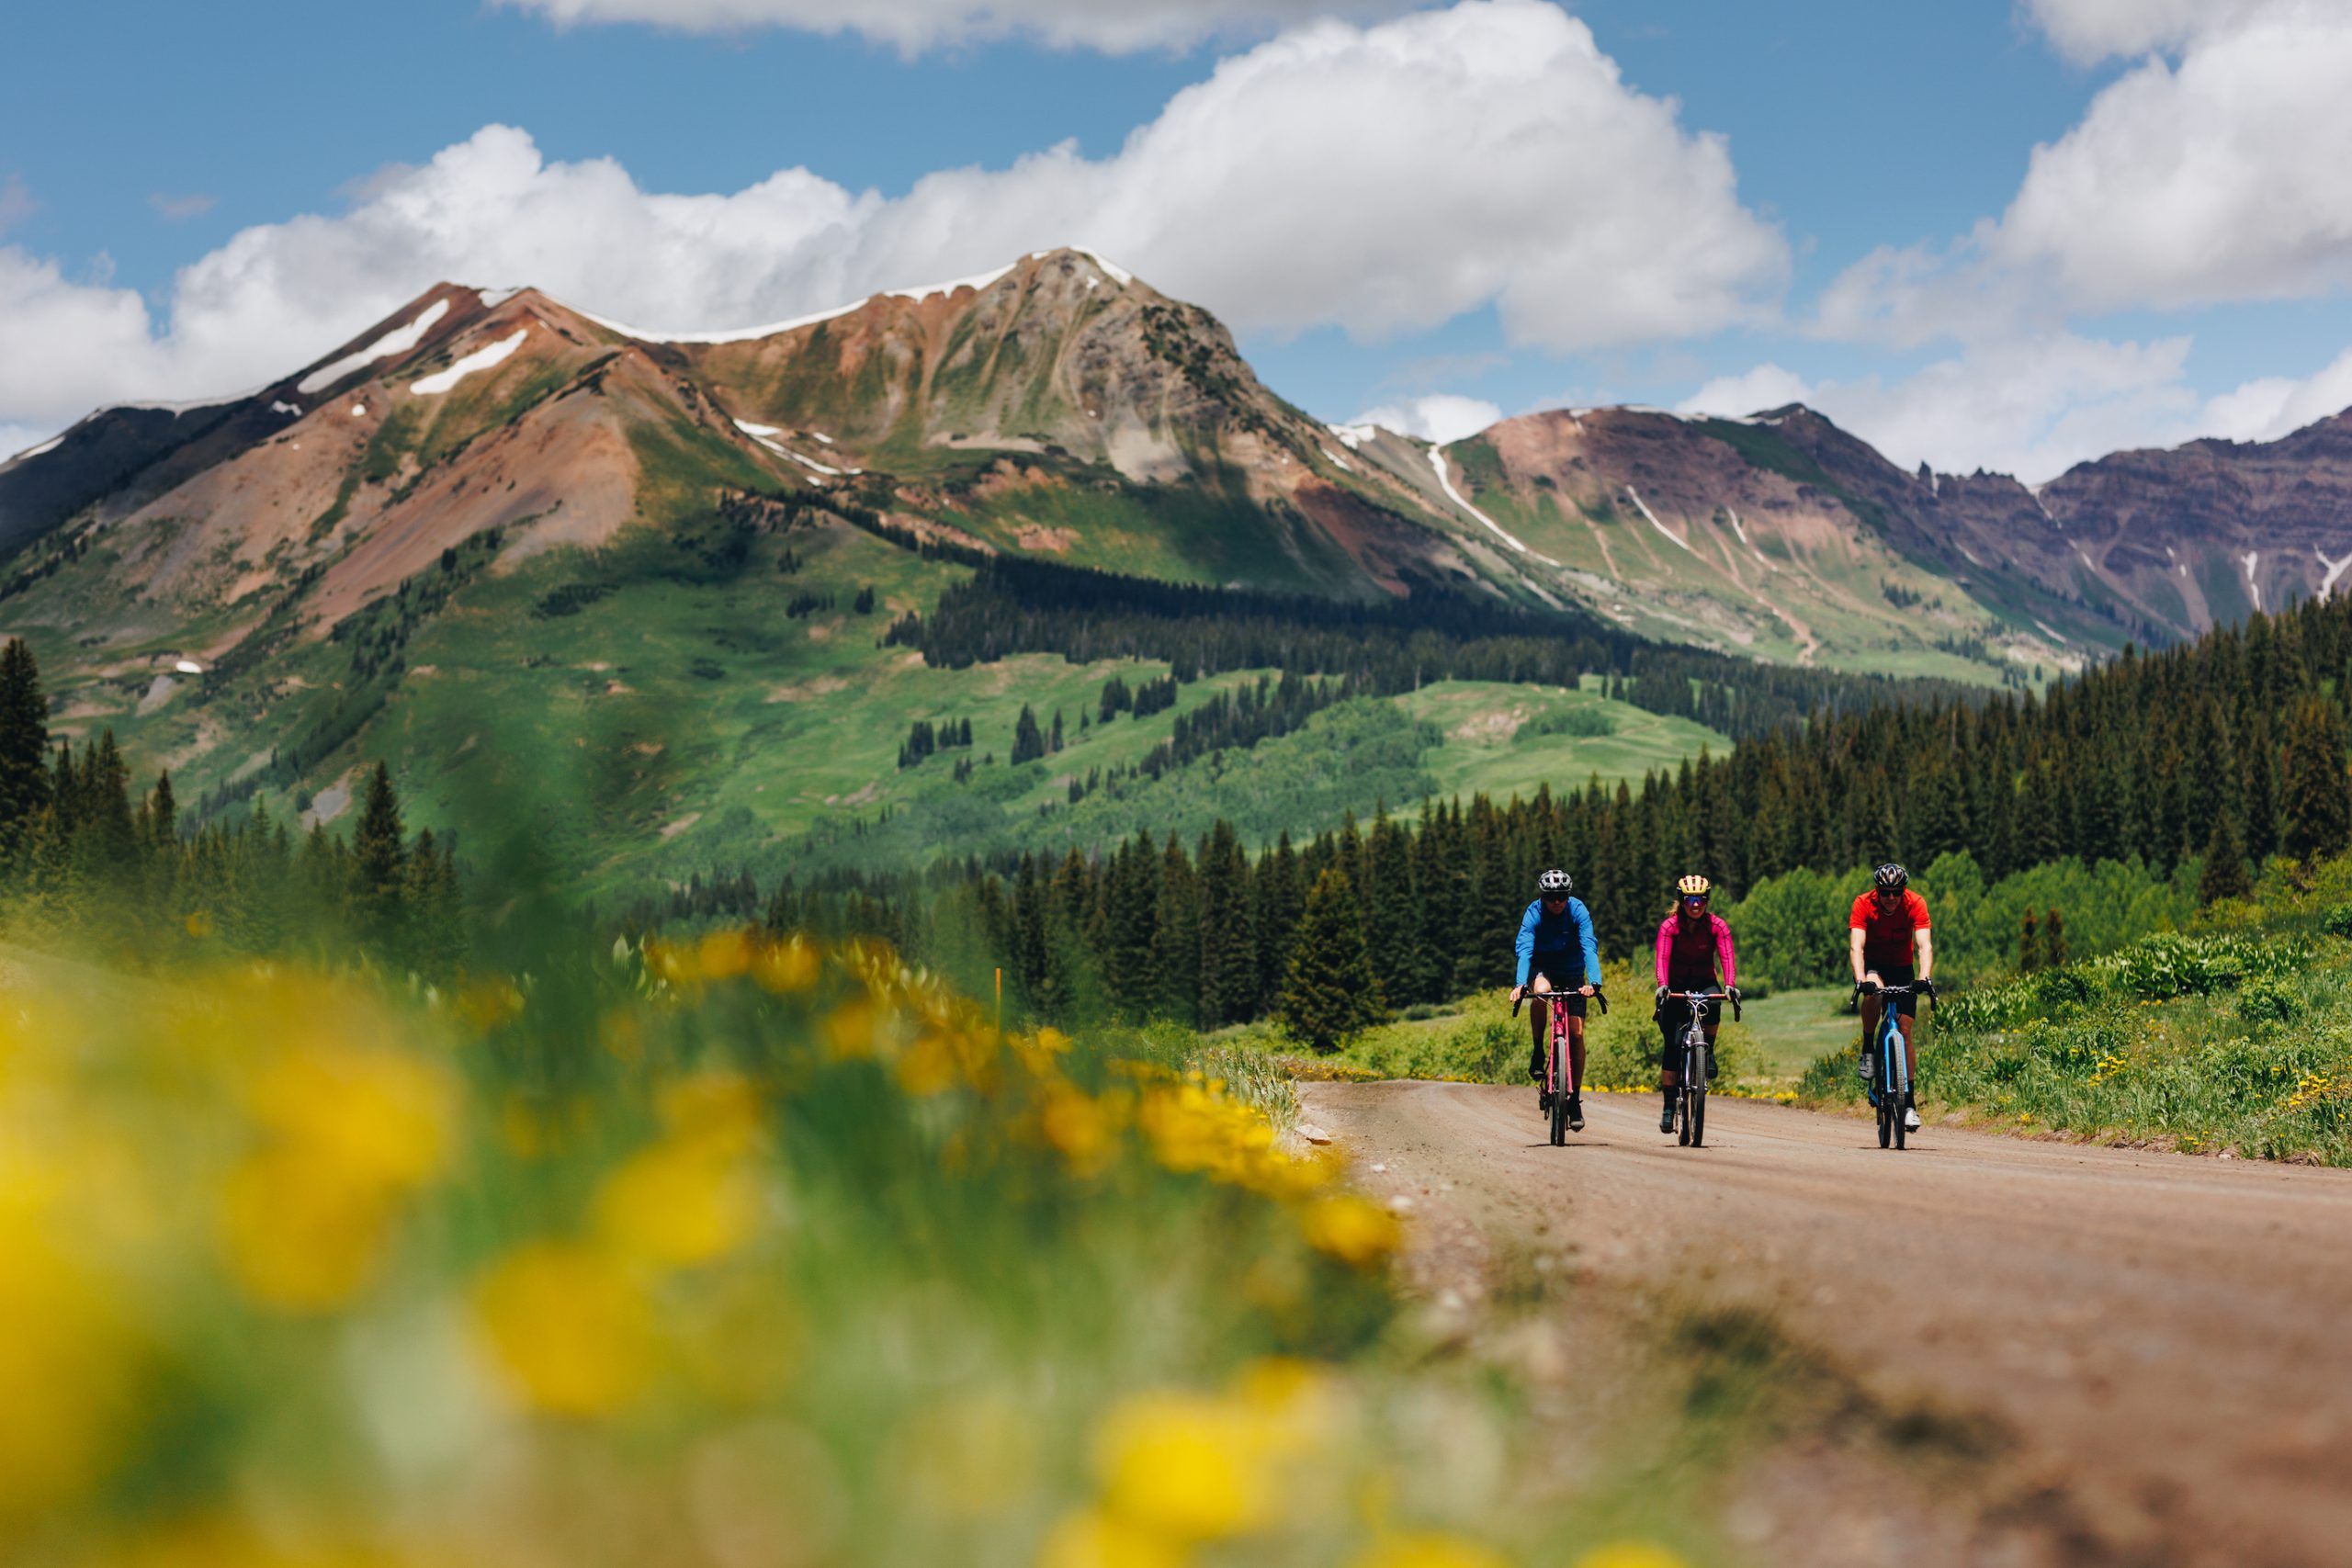 Three people ride bikes on a dirt road with a large mountain range in the background